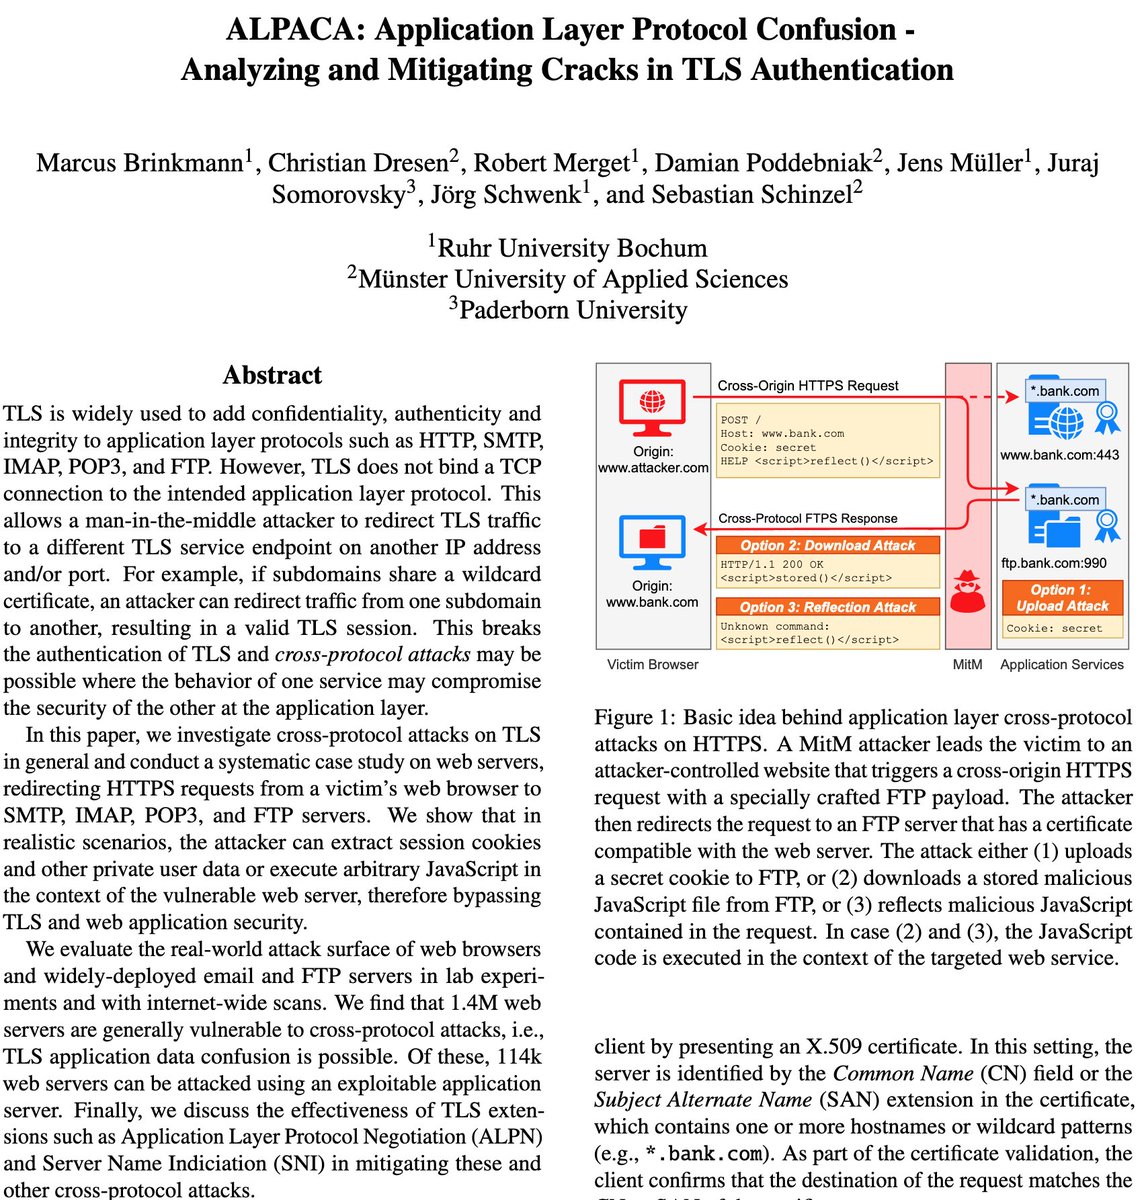 New paper: 'ALPACA: Application Layer Protocol Confusion -Analyzing and Mitigating Cracks in TLS Authentication' to be presented @USENIXSecurity '21. Joint work with @lambdafu @dr4ys3n @ic0nz1 @dues__  @jensvoid @jurajsomorovsky @JoergSchwenk. 1/